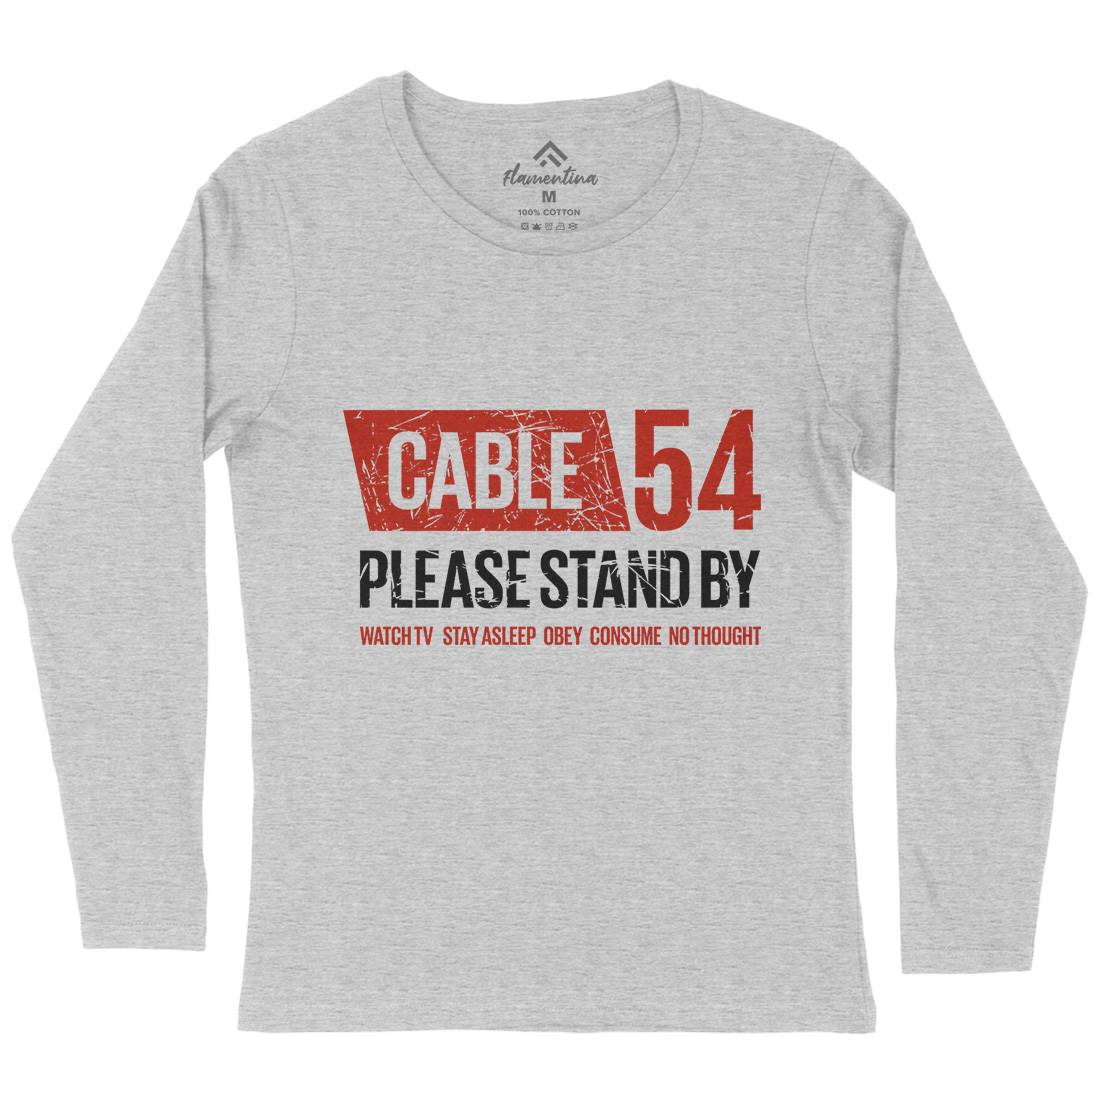 Cable 54 Womens Long Sleeve T-Shirt Horror D344